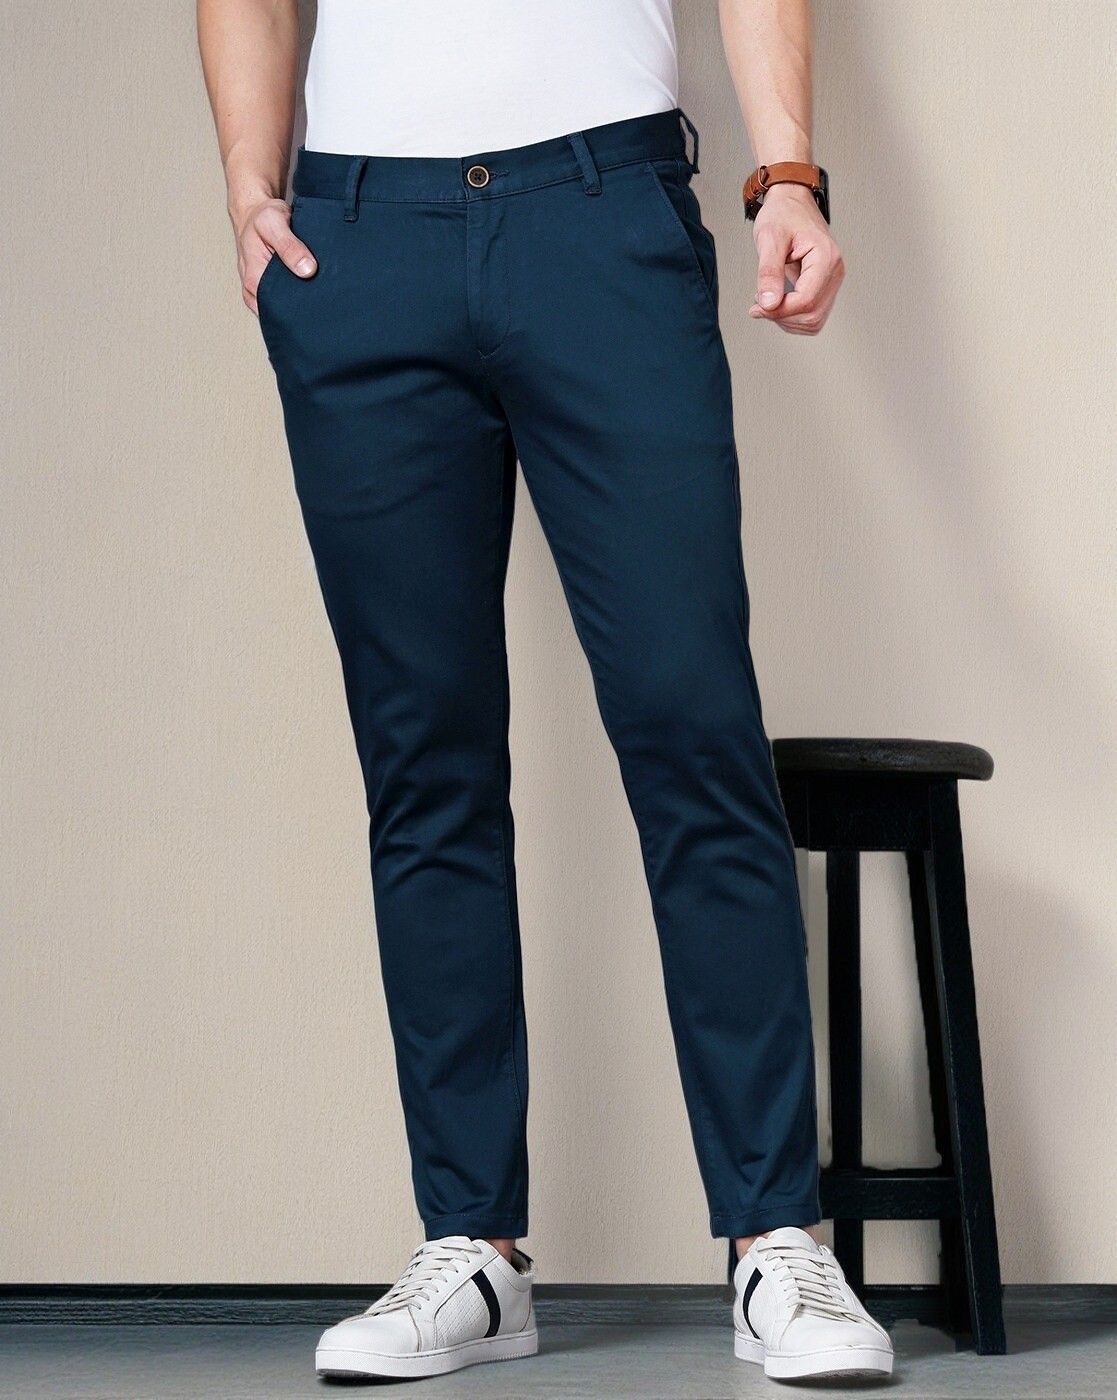 FAITHFUL MENS ROYAL BLUE WORK TROUSERS WITH Zip Fly 32